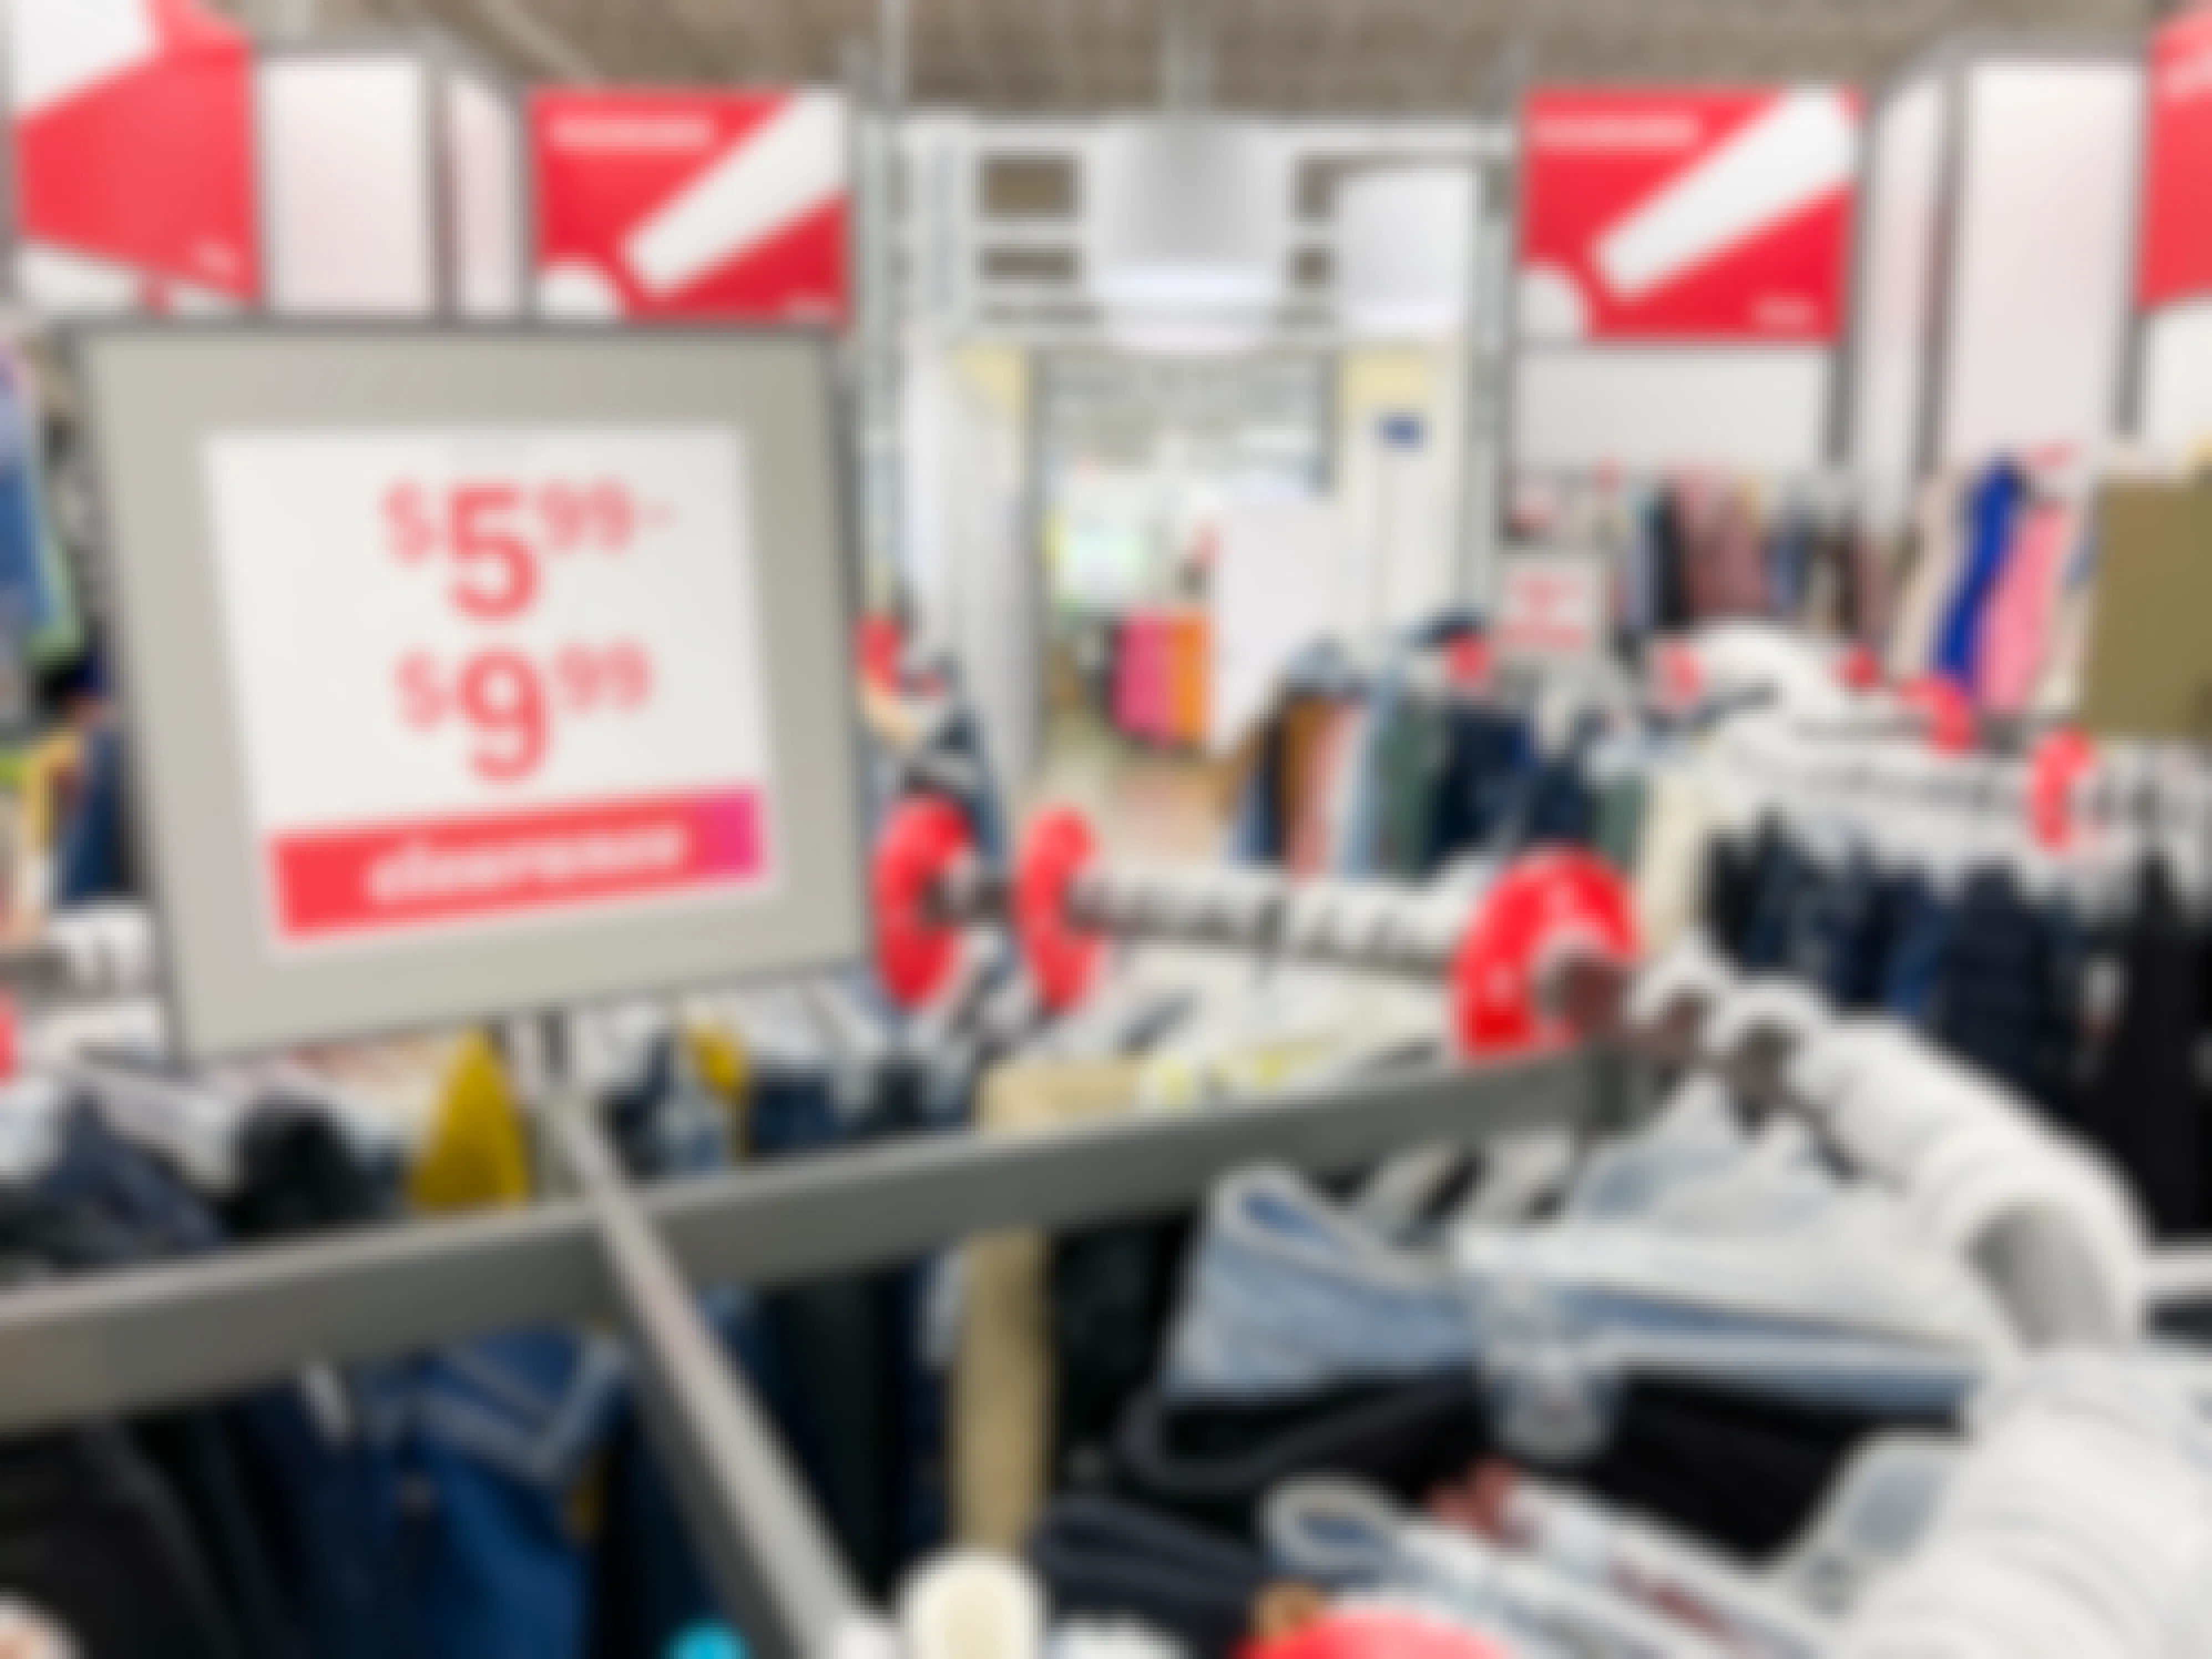 Macy's, Gap, & Target Have Too Much Inventory — Clearance Coming